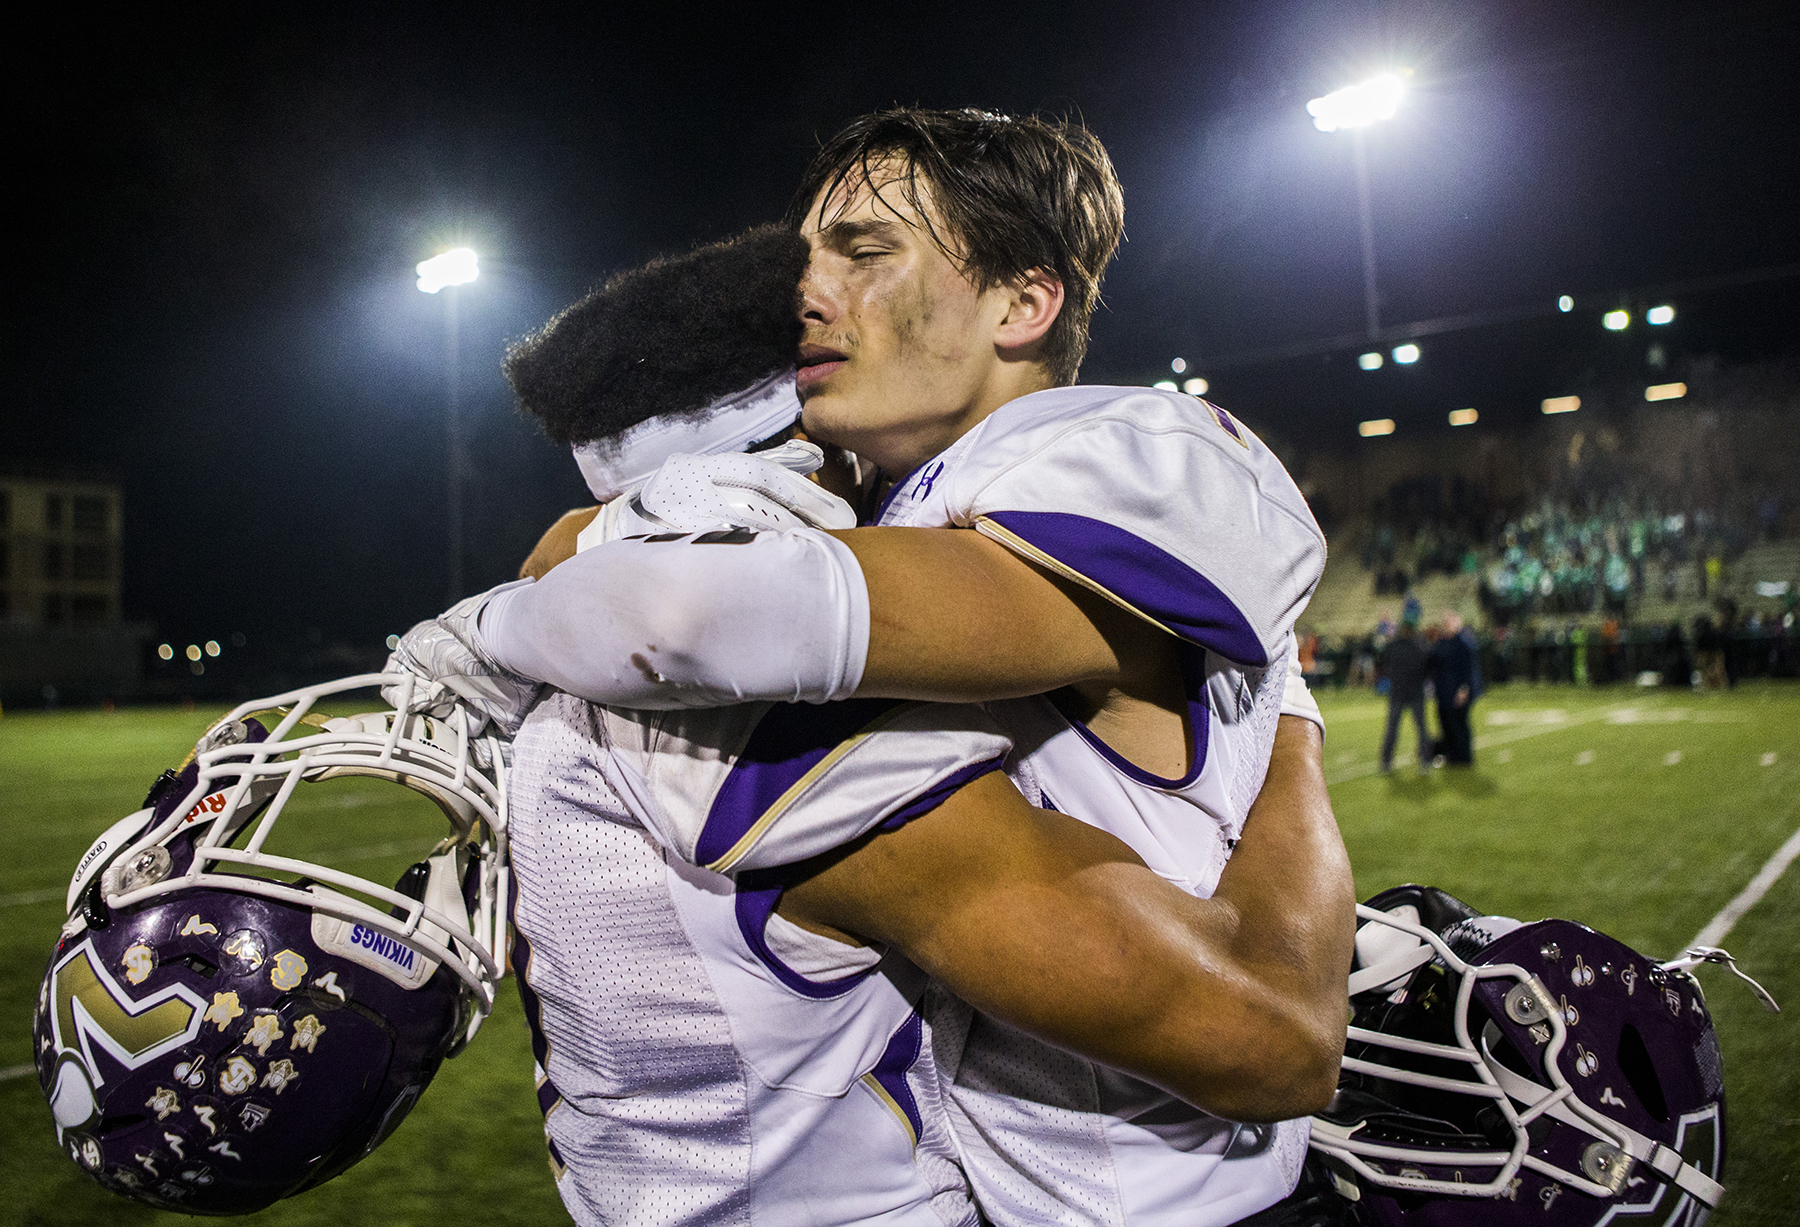  Lake Stevens’ Ian Hanson hugs teammate Isaiah Harris while he cries after winning the Class 4A state semifinal game against Woodinville at Pop Keeney Stadium on Saturday, Nov. 24, 2018 in Bothell, Washington. 